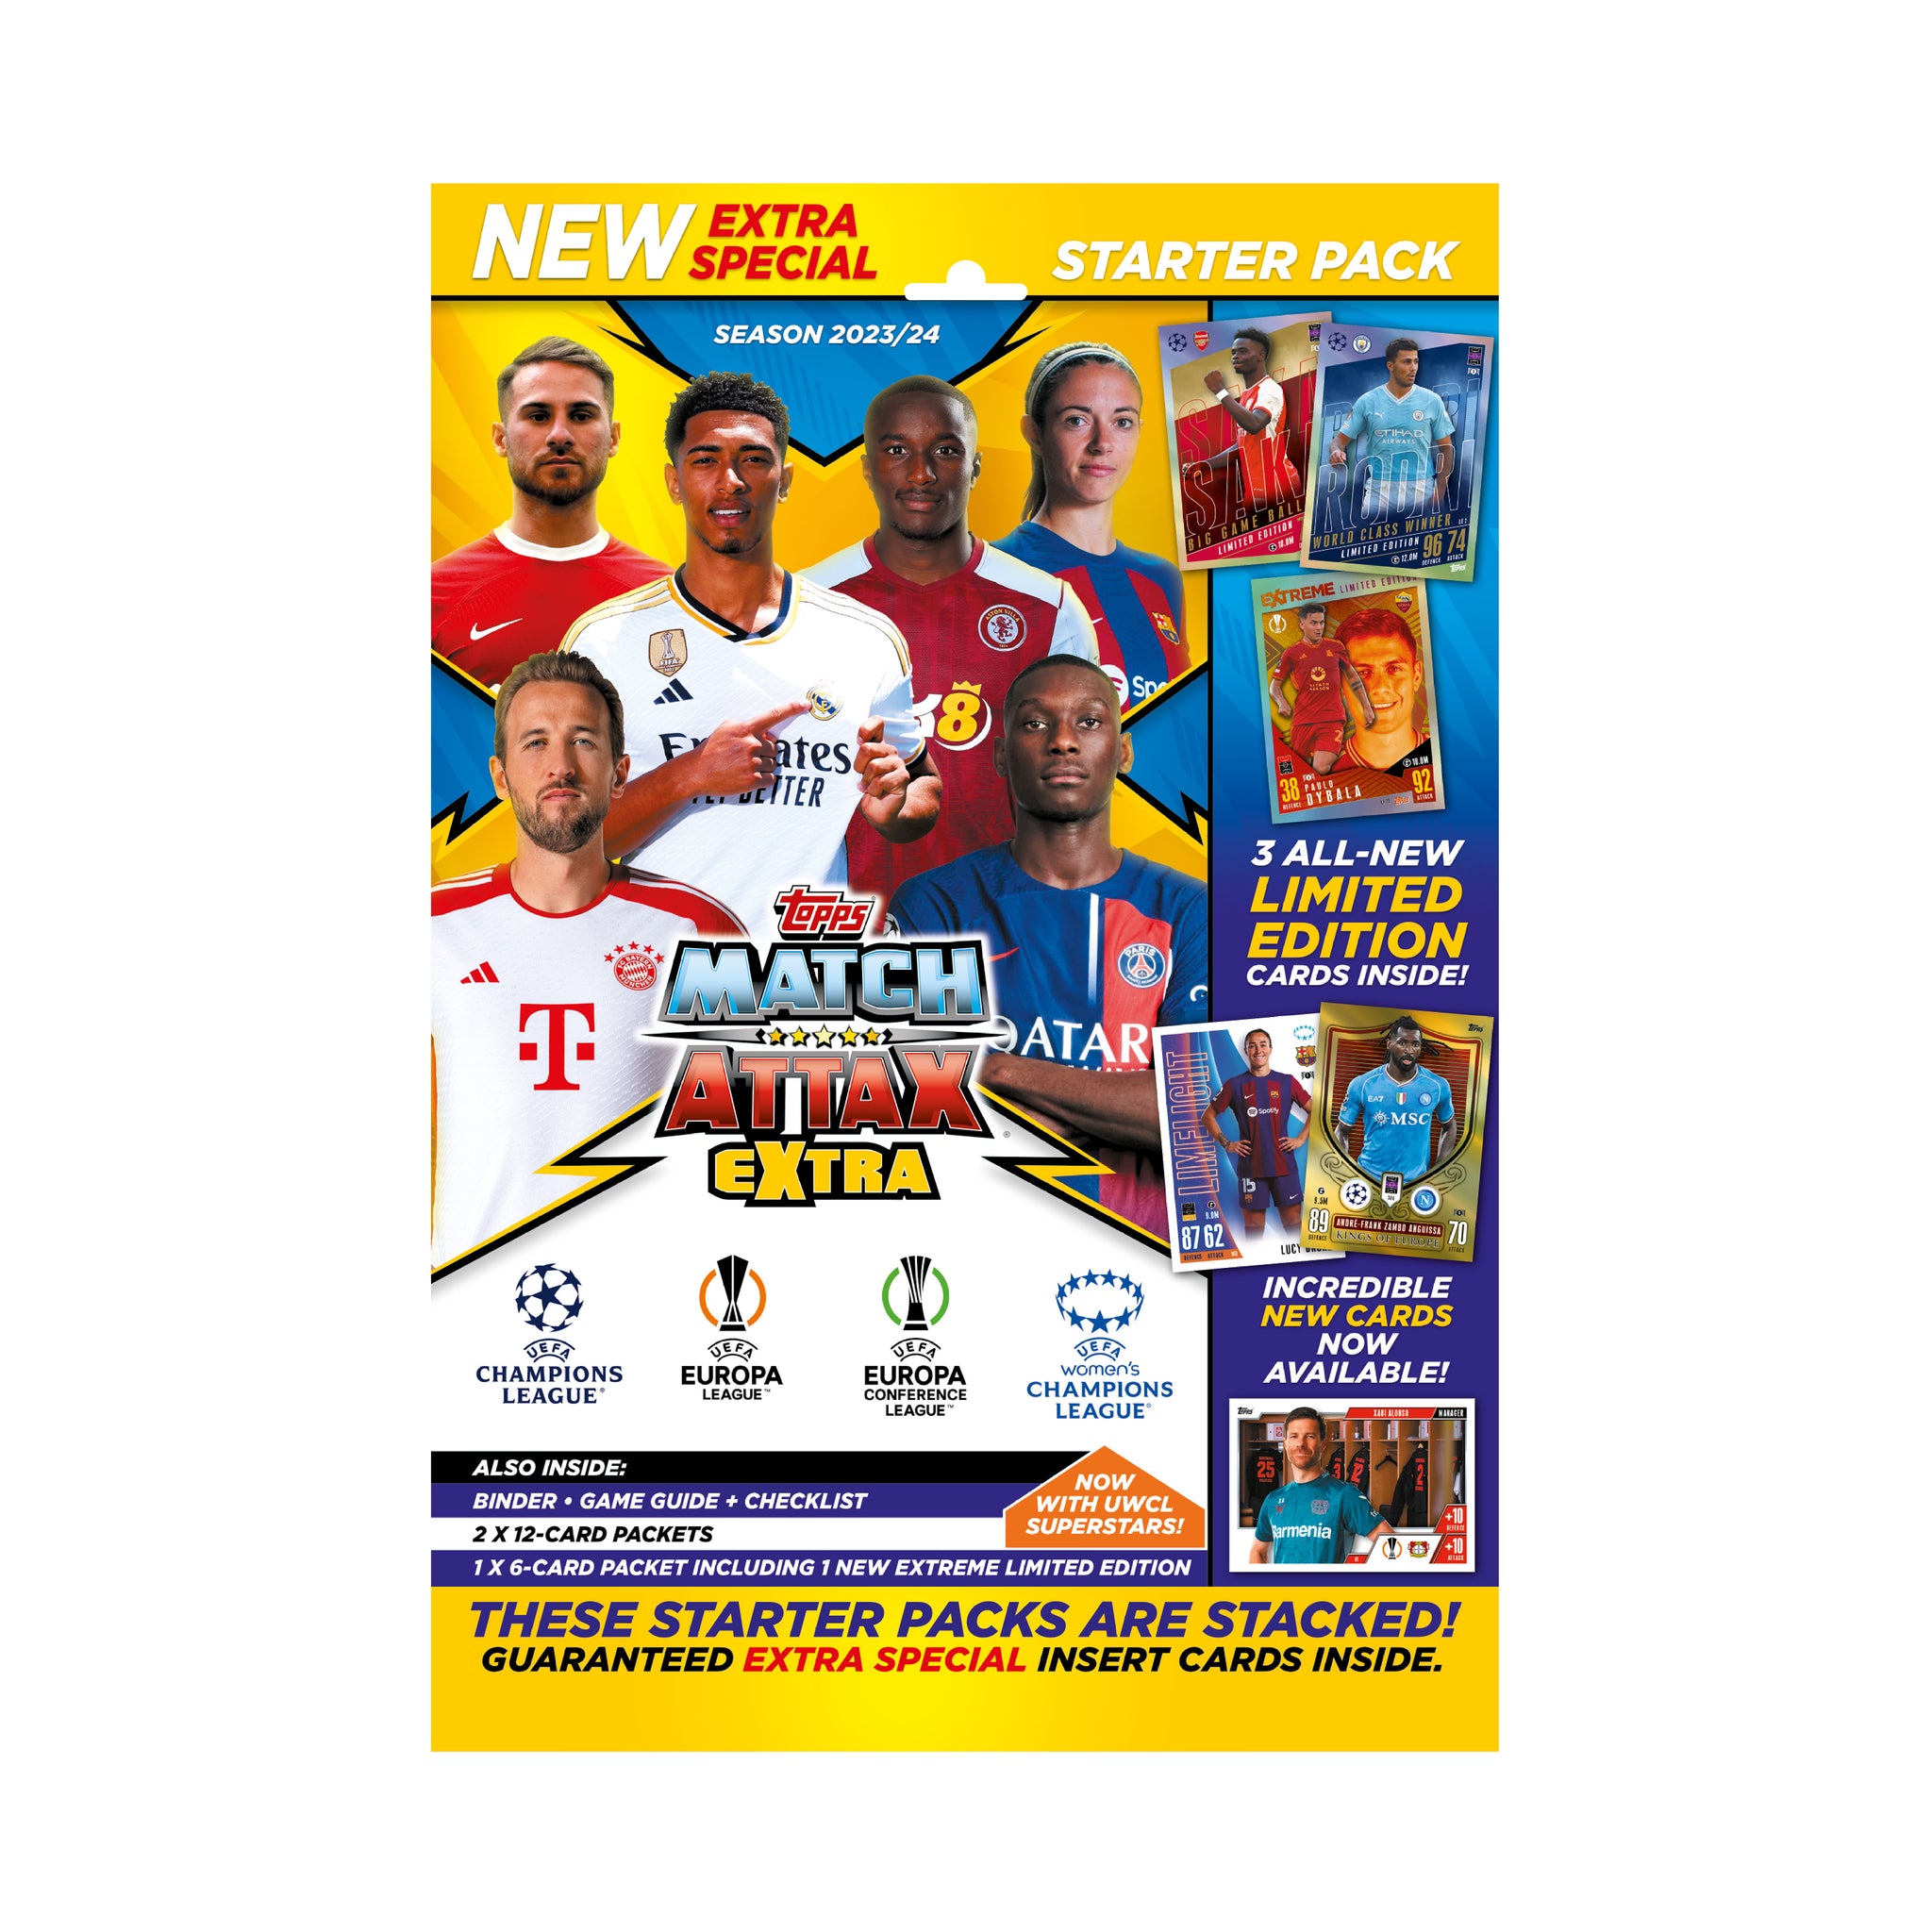 2023-24 TOPPS MATCH ATTAX EXTRA CHAMPIONS LEAGUE CARDS - STARTER PACK (ALBUM, 24 CARDS + 2 LE)